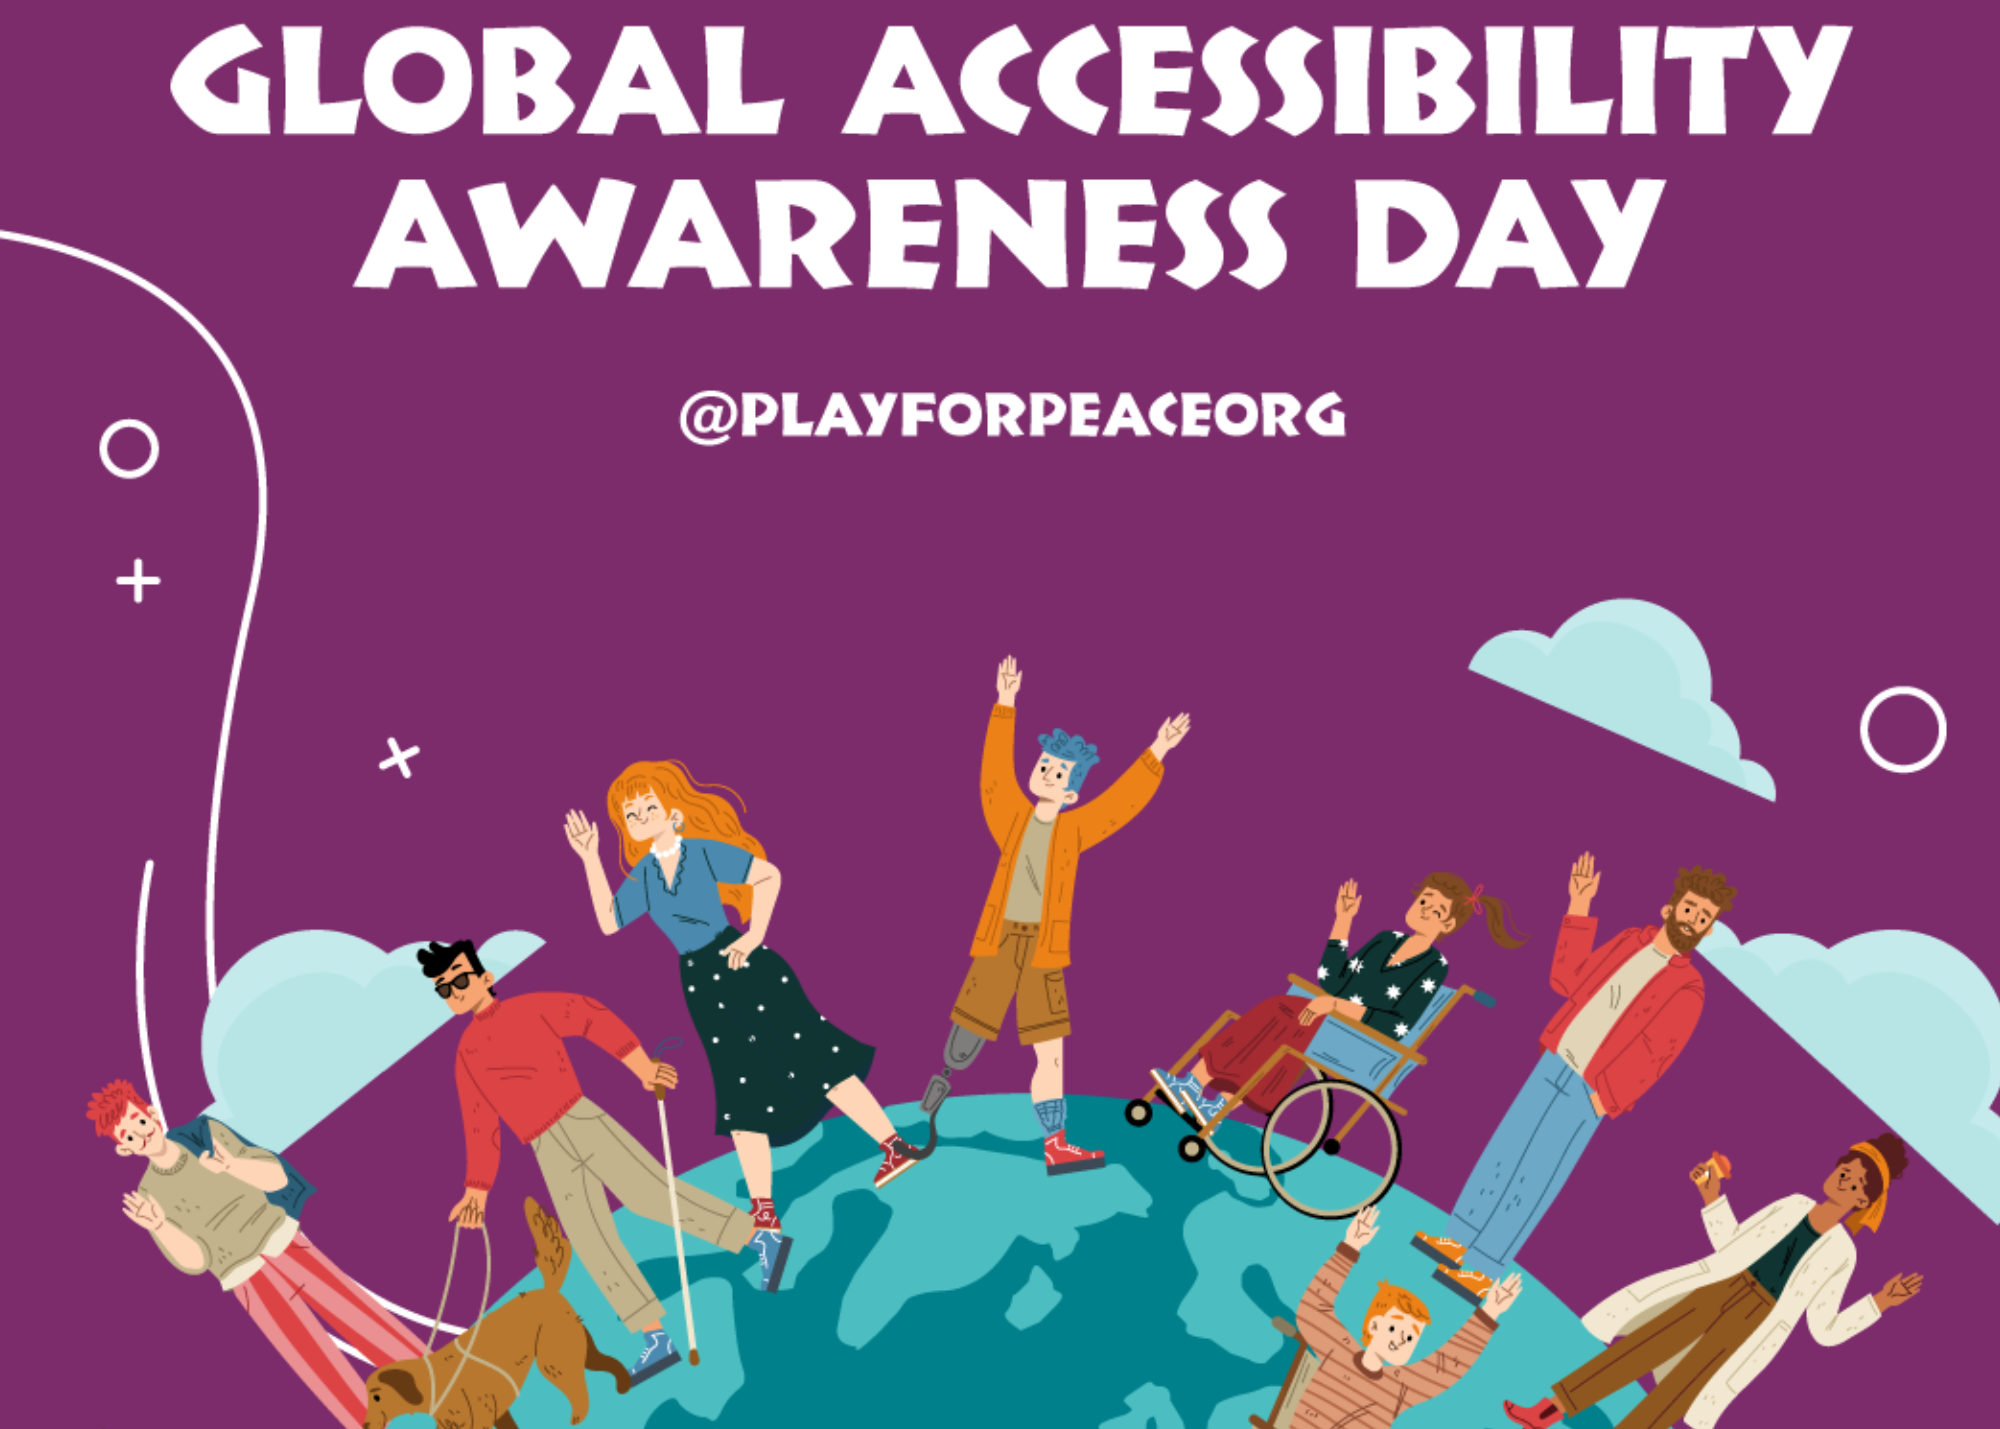 Let's celebrate our progress towards a more inclusive and accessible world.